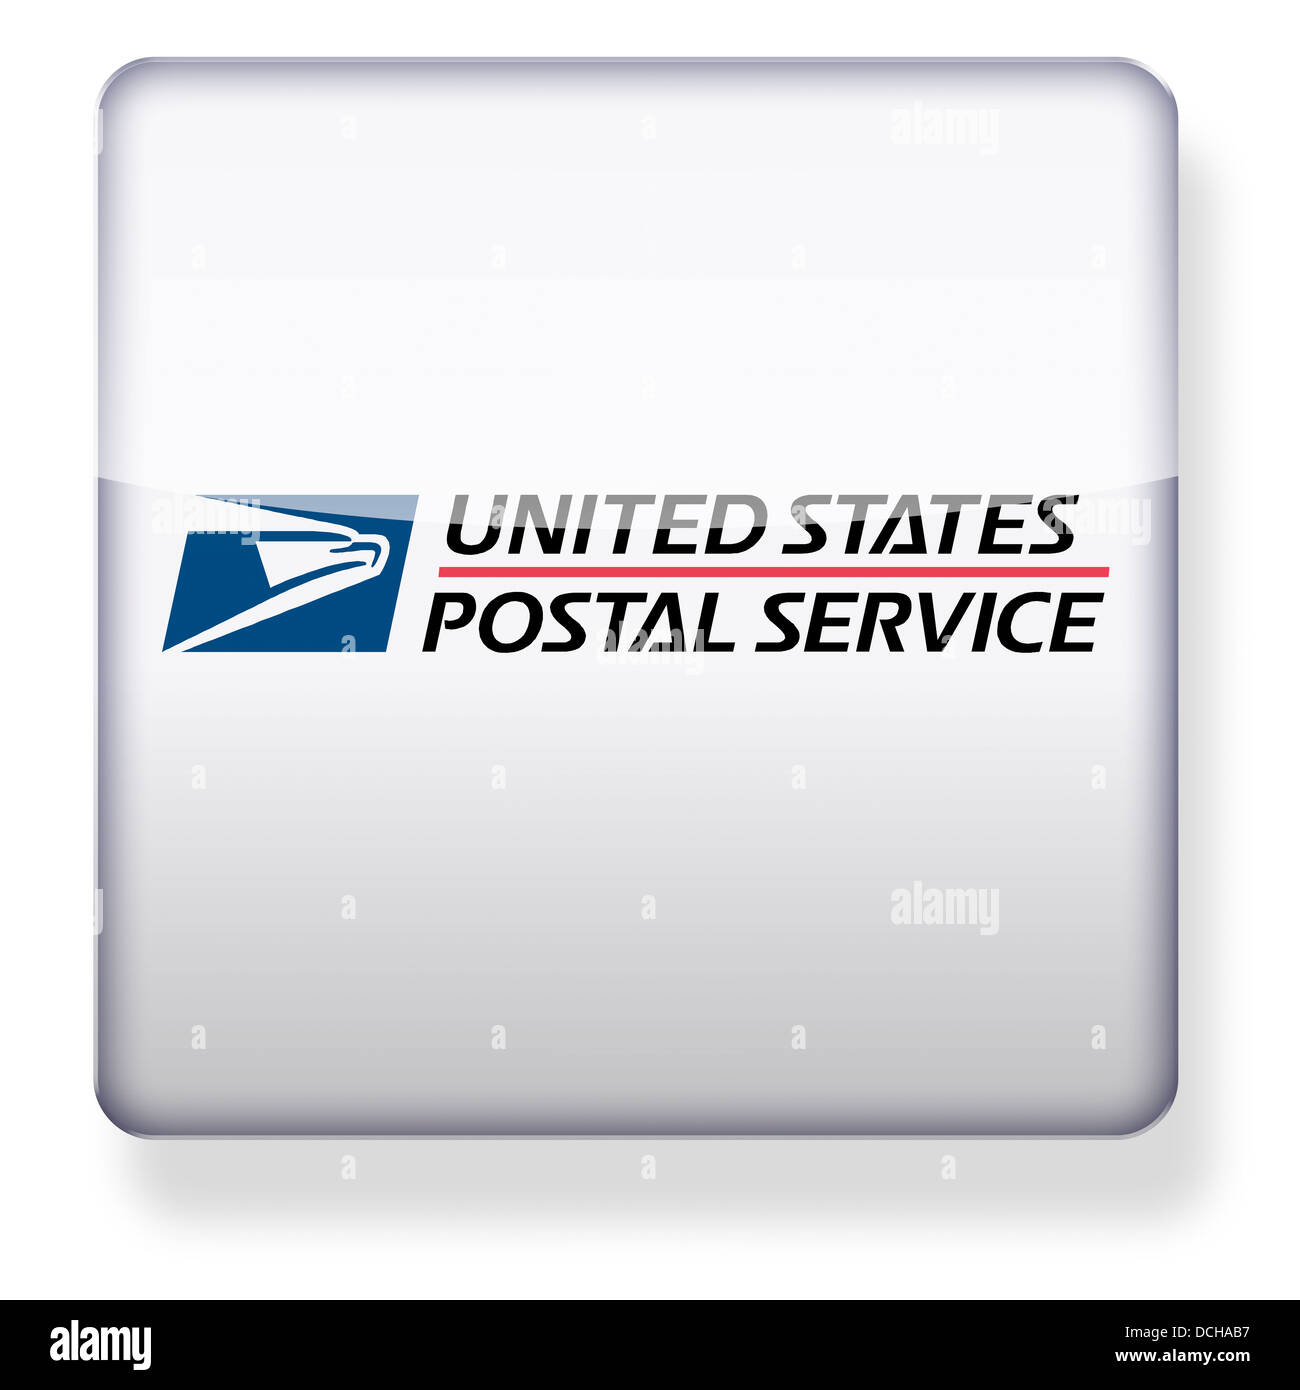 United States Postal Service logo as an app icon. Clipping path included. Stock Photo